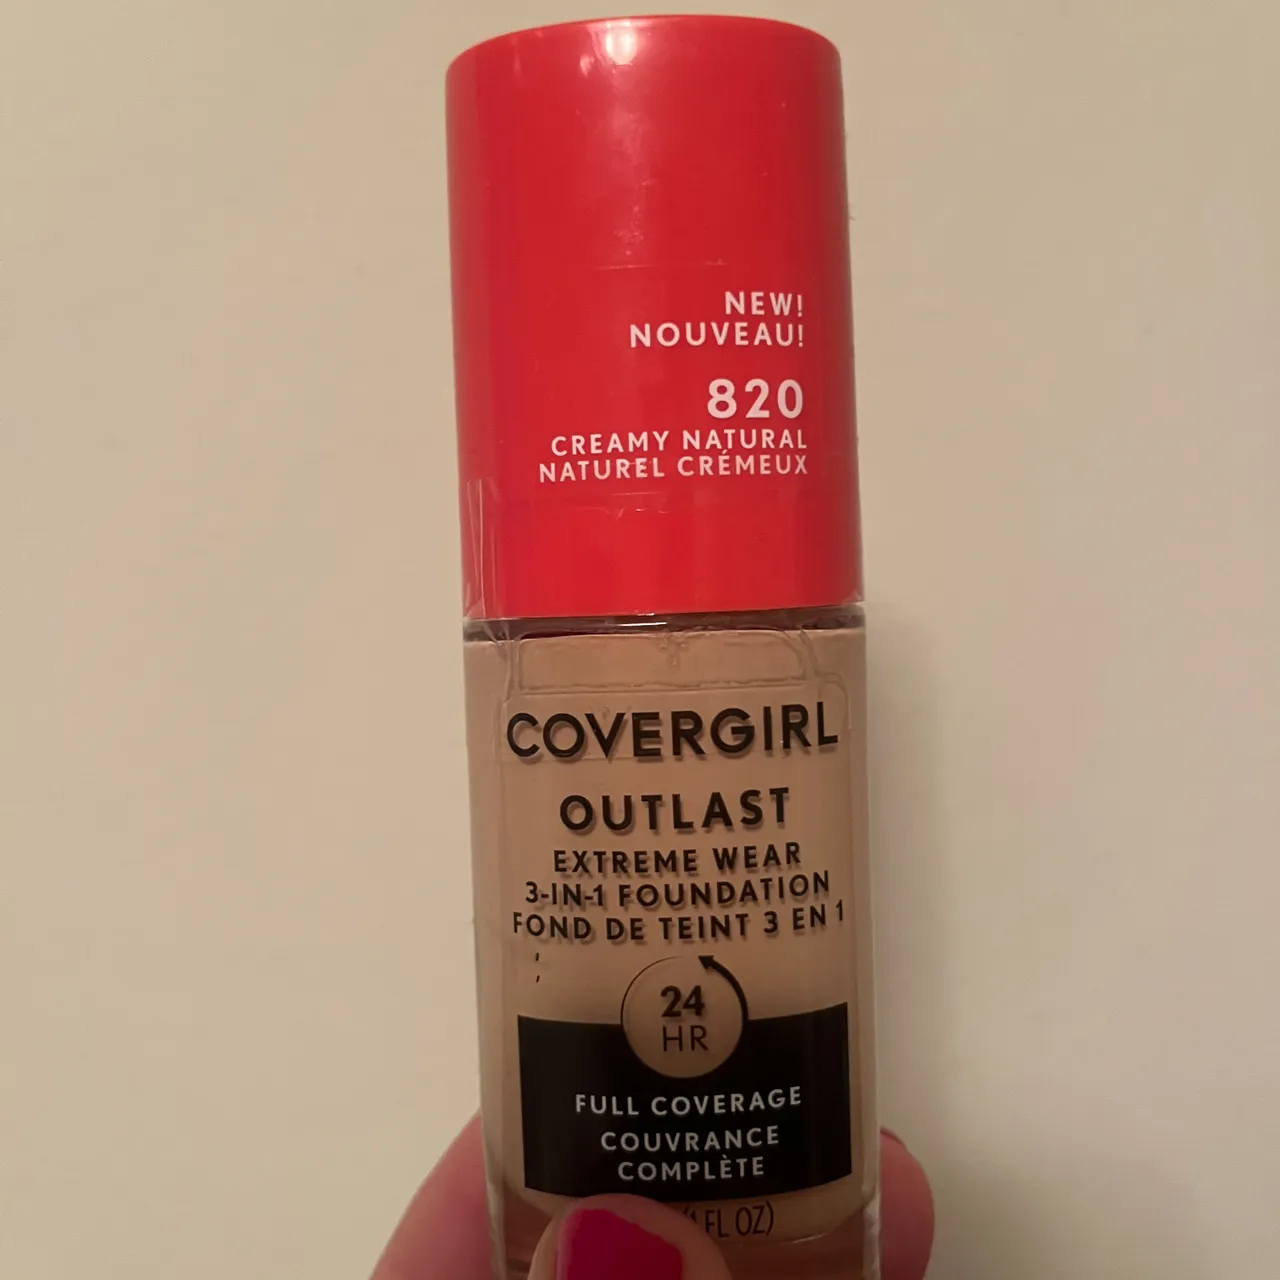 Covergirl Outlast Extreme Wear 3-in-1 Foundation photo 1